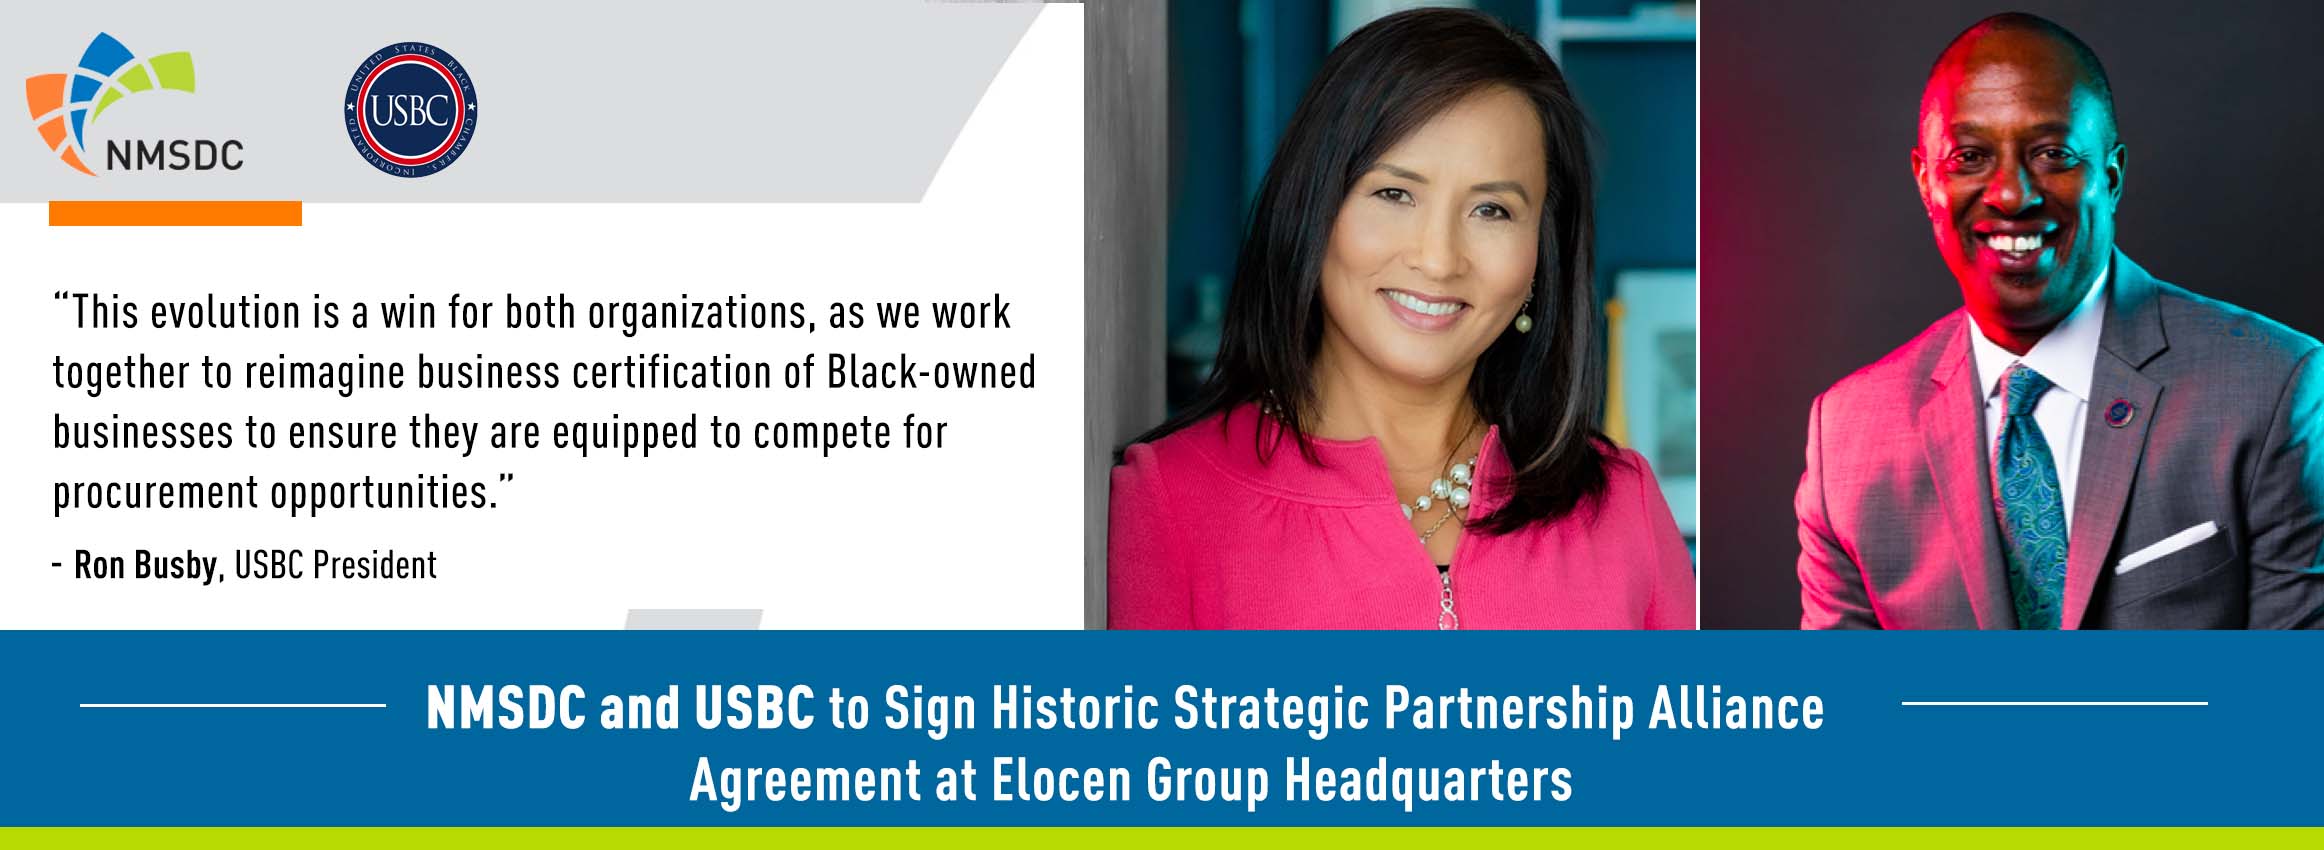 NMSDC and USBC to Sign Historic Strategic Partnership Alliance Agreement at Elocen Group Headquarters